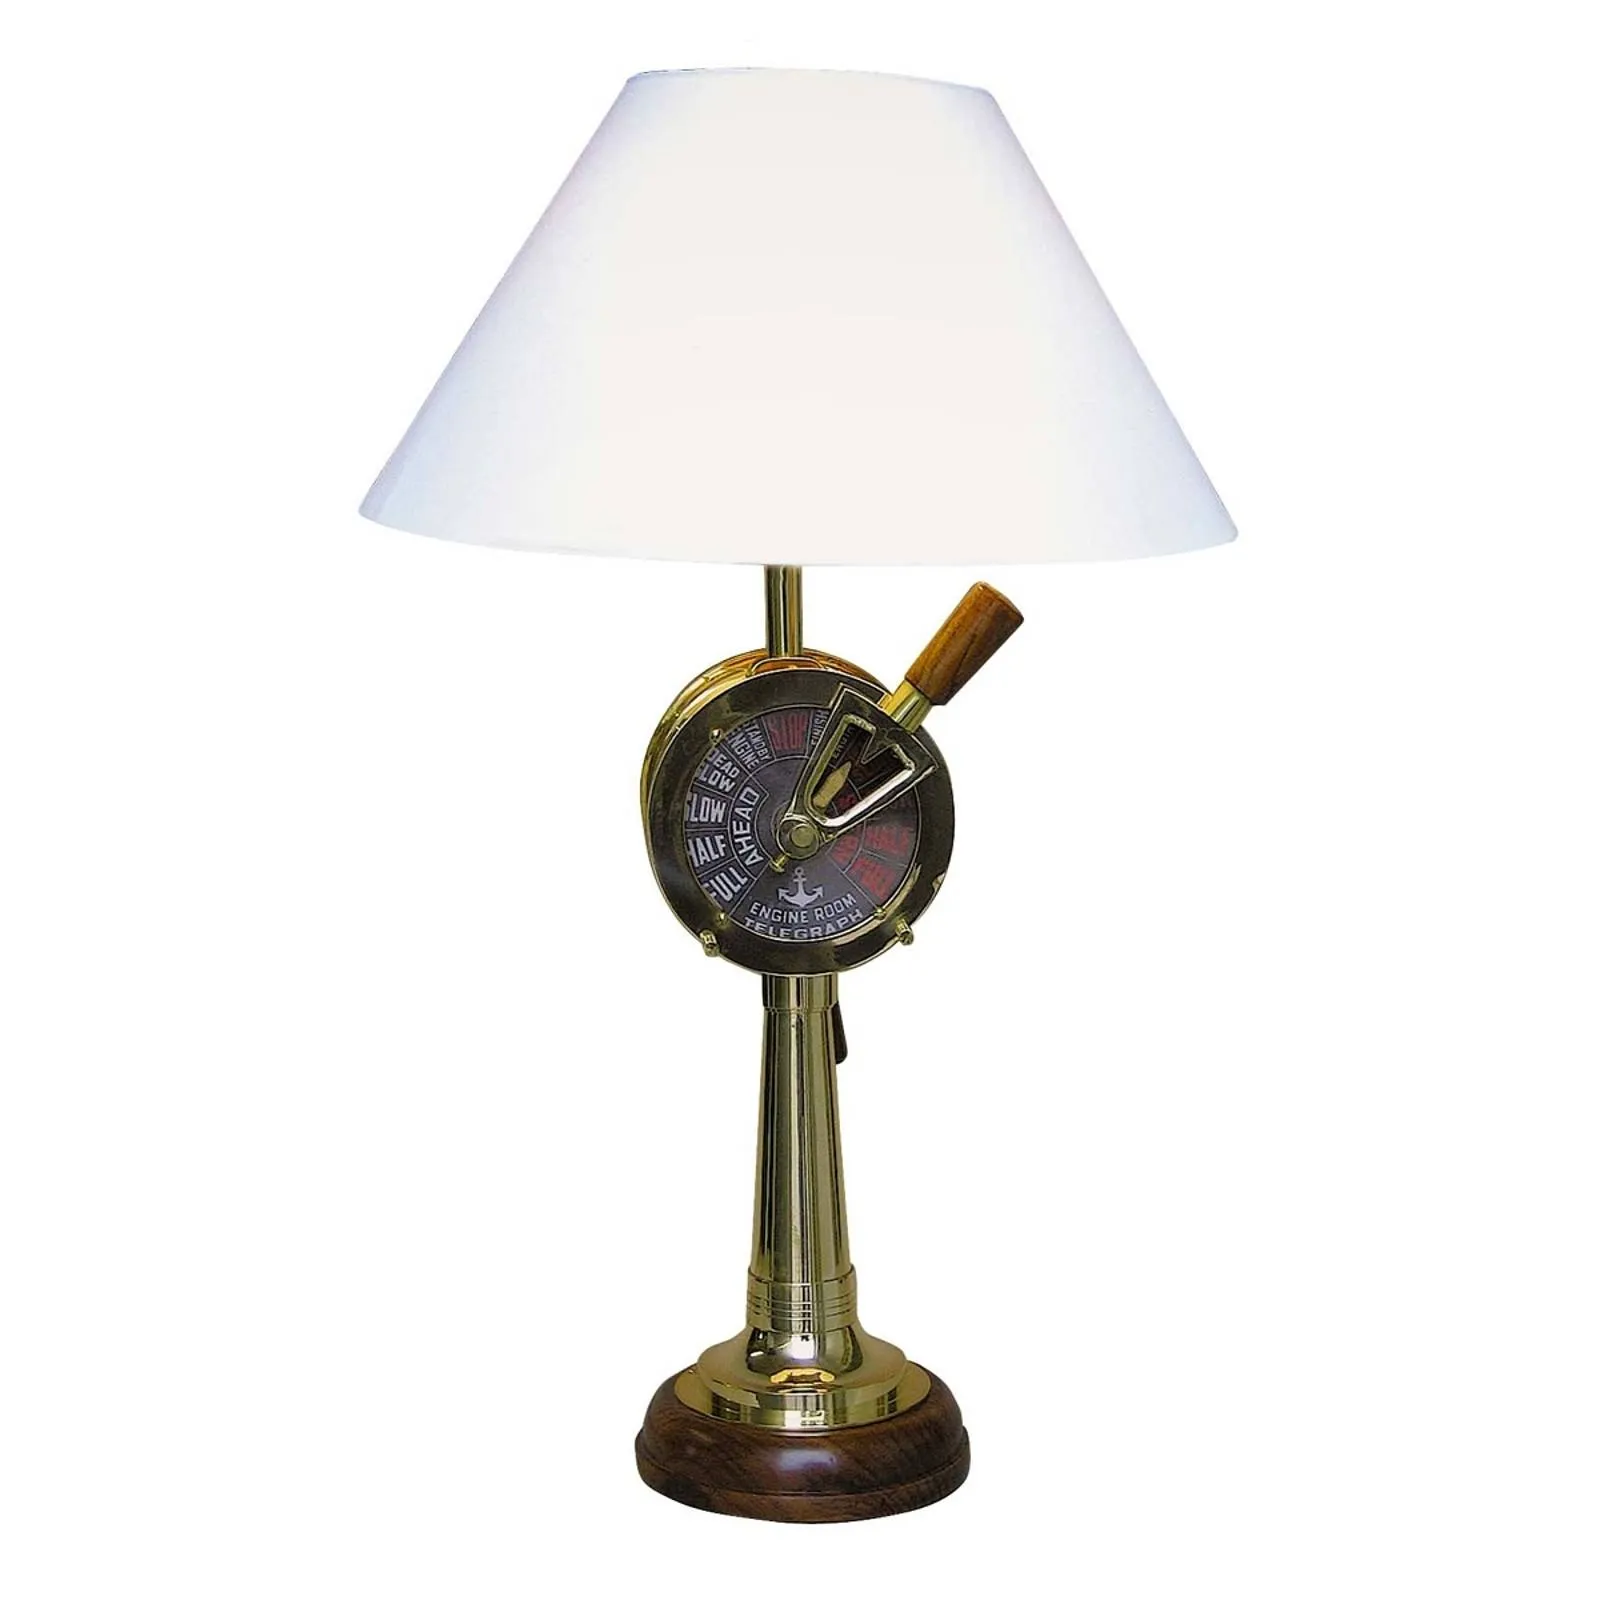 Extraordinary table lamp CRUISE with wood